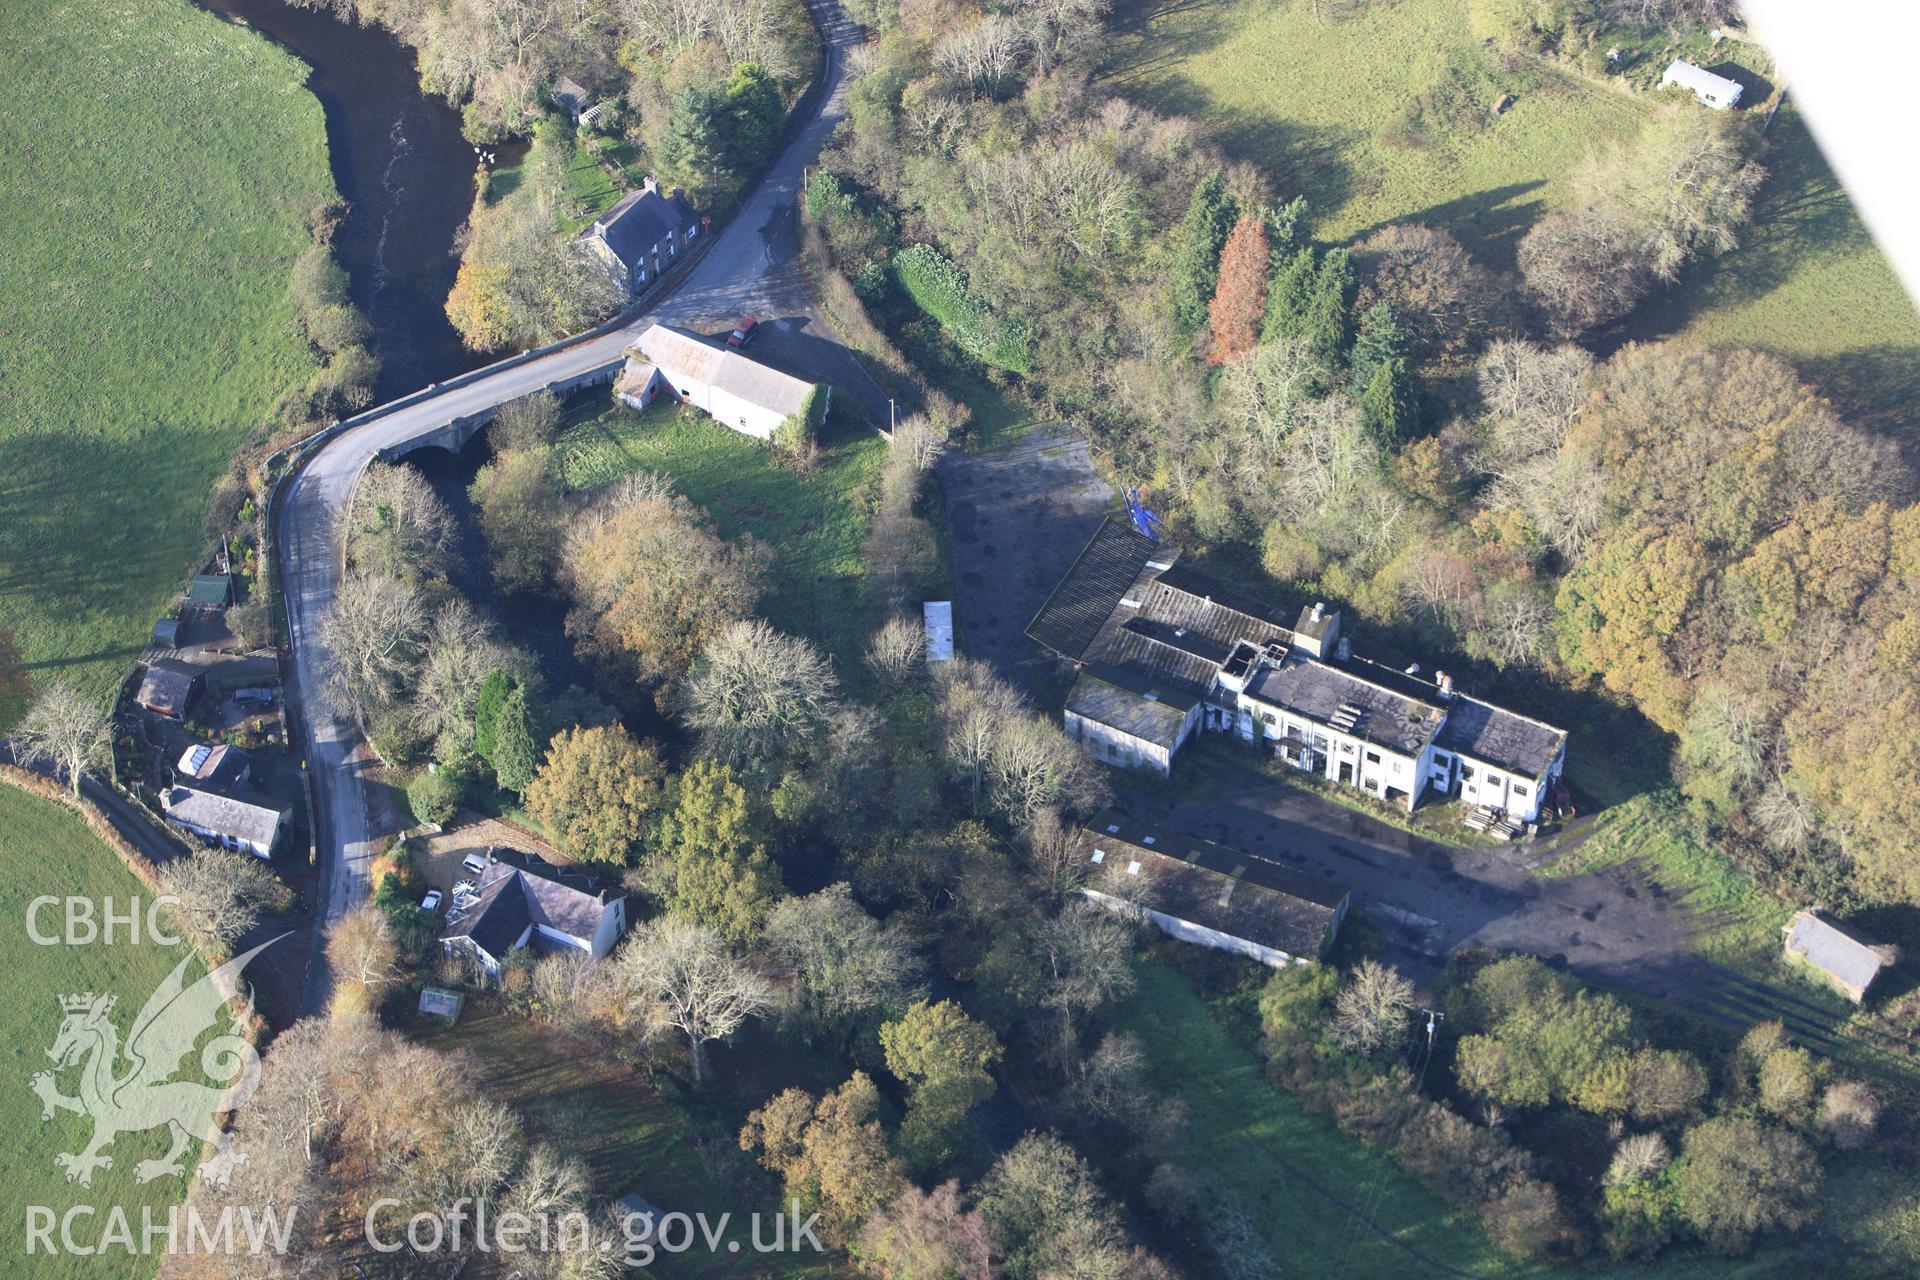 RCAHMW colour oblique aerial photograph of Milk Factory at Pont Llanio. Taken on 09 November 2009 by Toby Driver